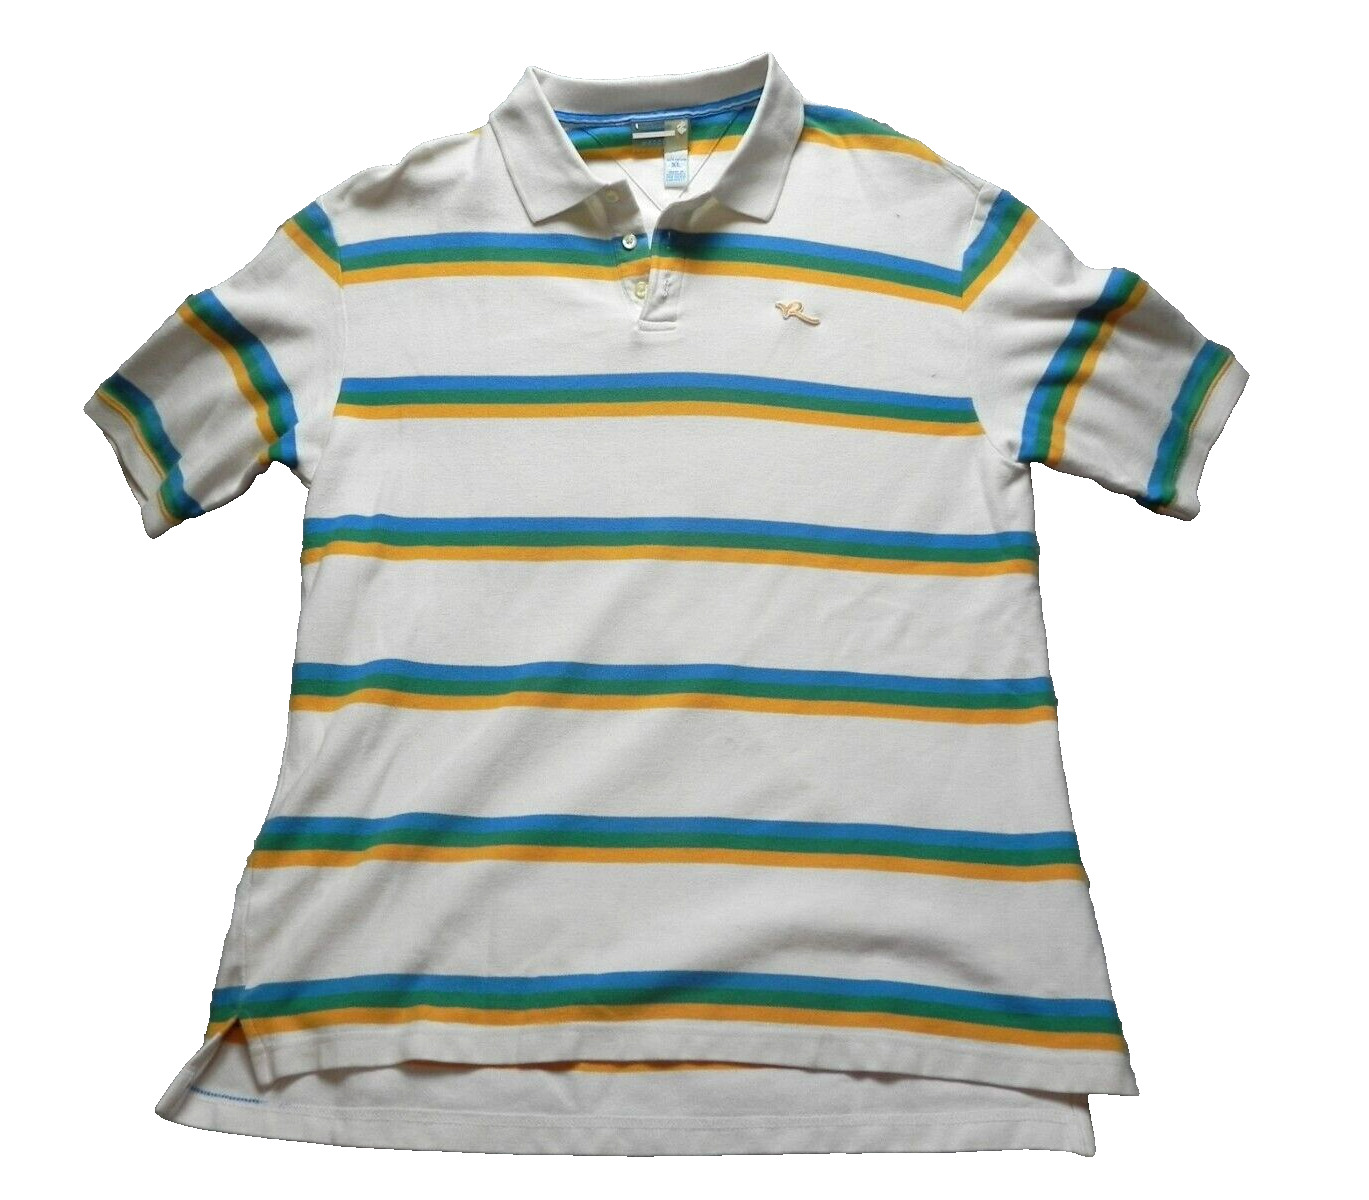 Rocawear Shirt Adult Extra Large Striped Rugby Preppy Casual Golf Polo Mens